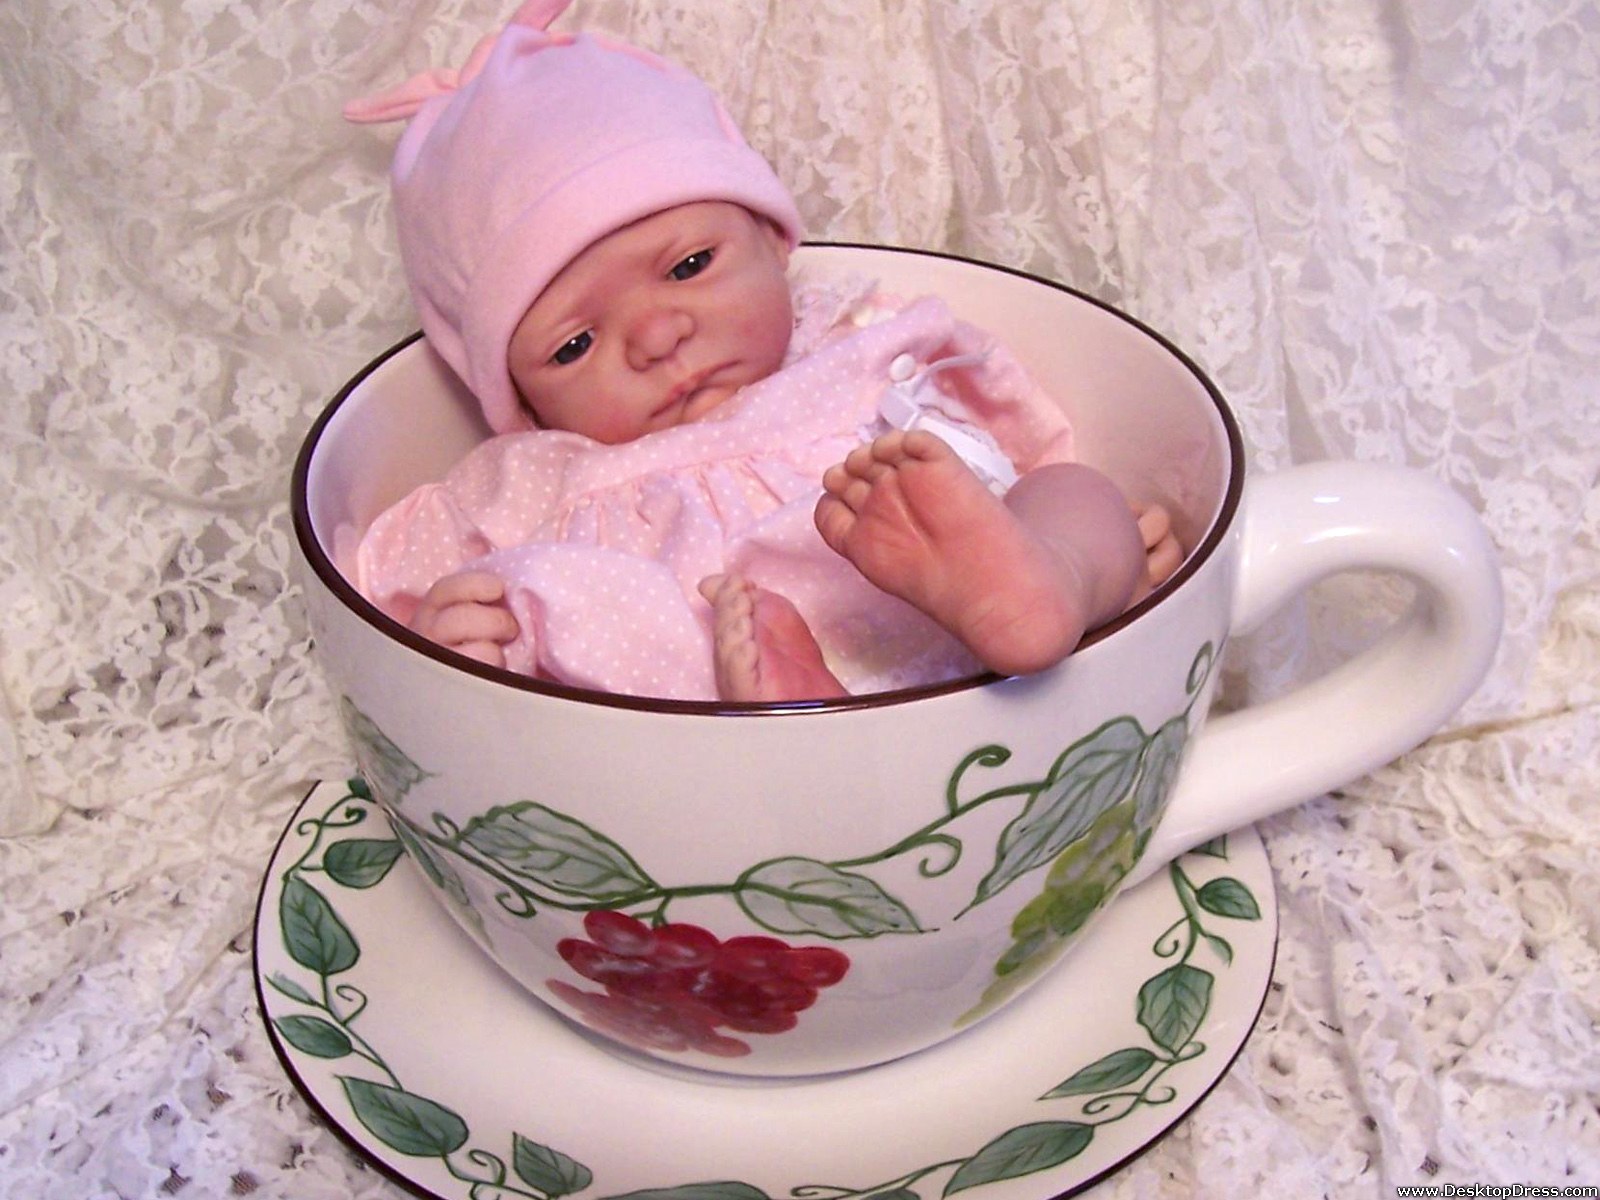 Baby Girl In A Big Cup - If I Fits I Sits Baby - HD Wallpaper 